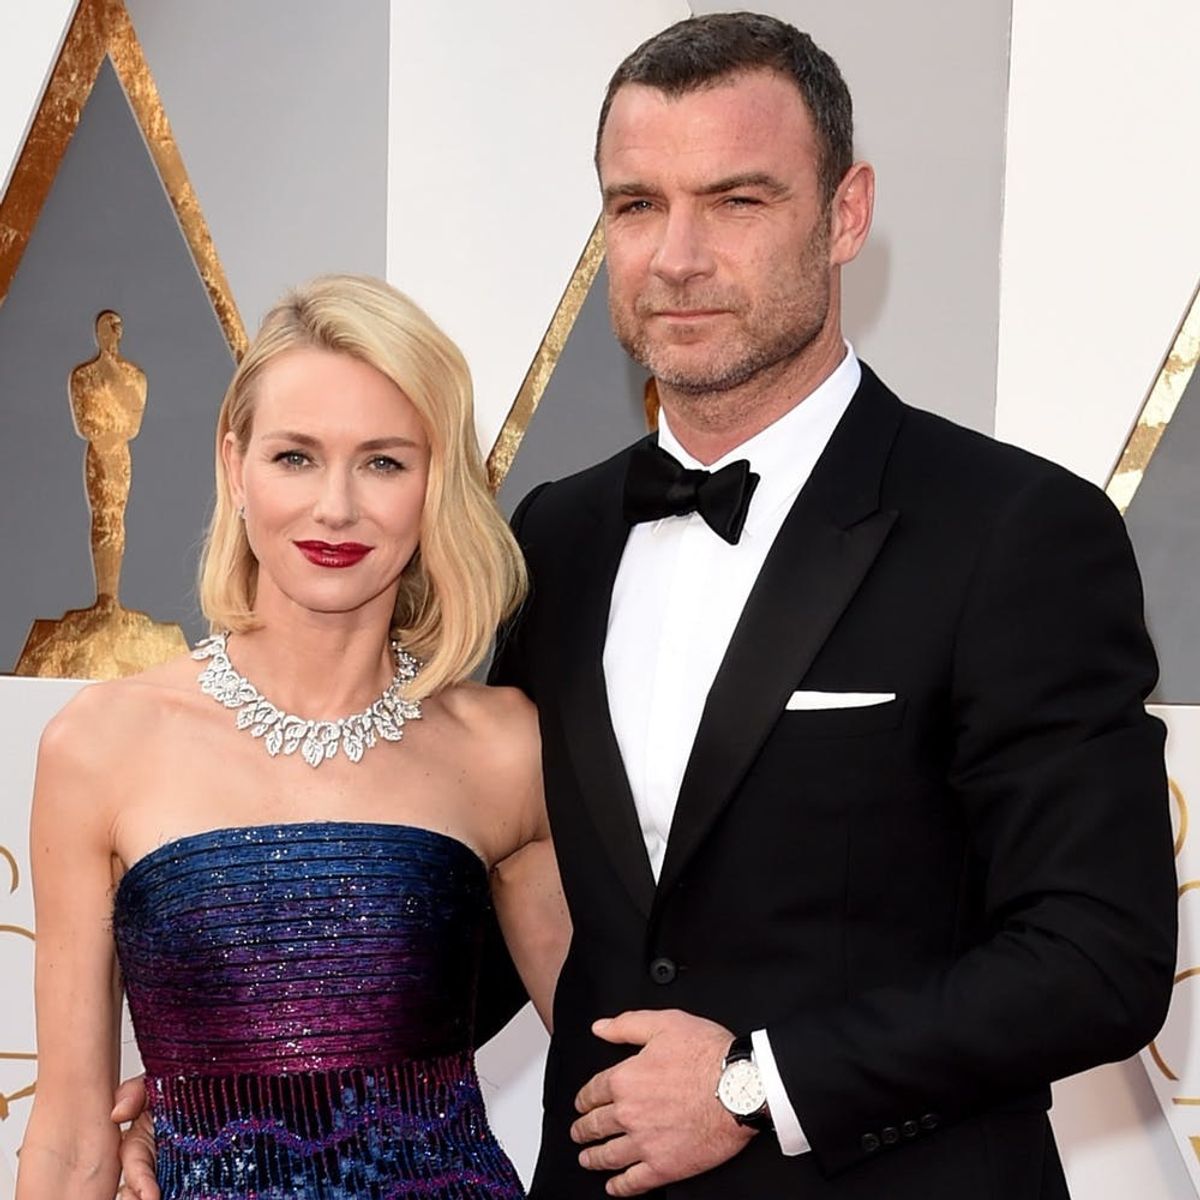 Liev Schreiber Opens Up About His Split from Naomi Watts: “We’ll Always Be Partners”